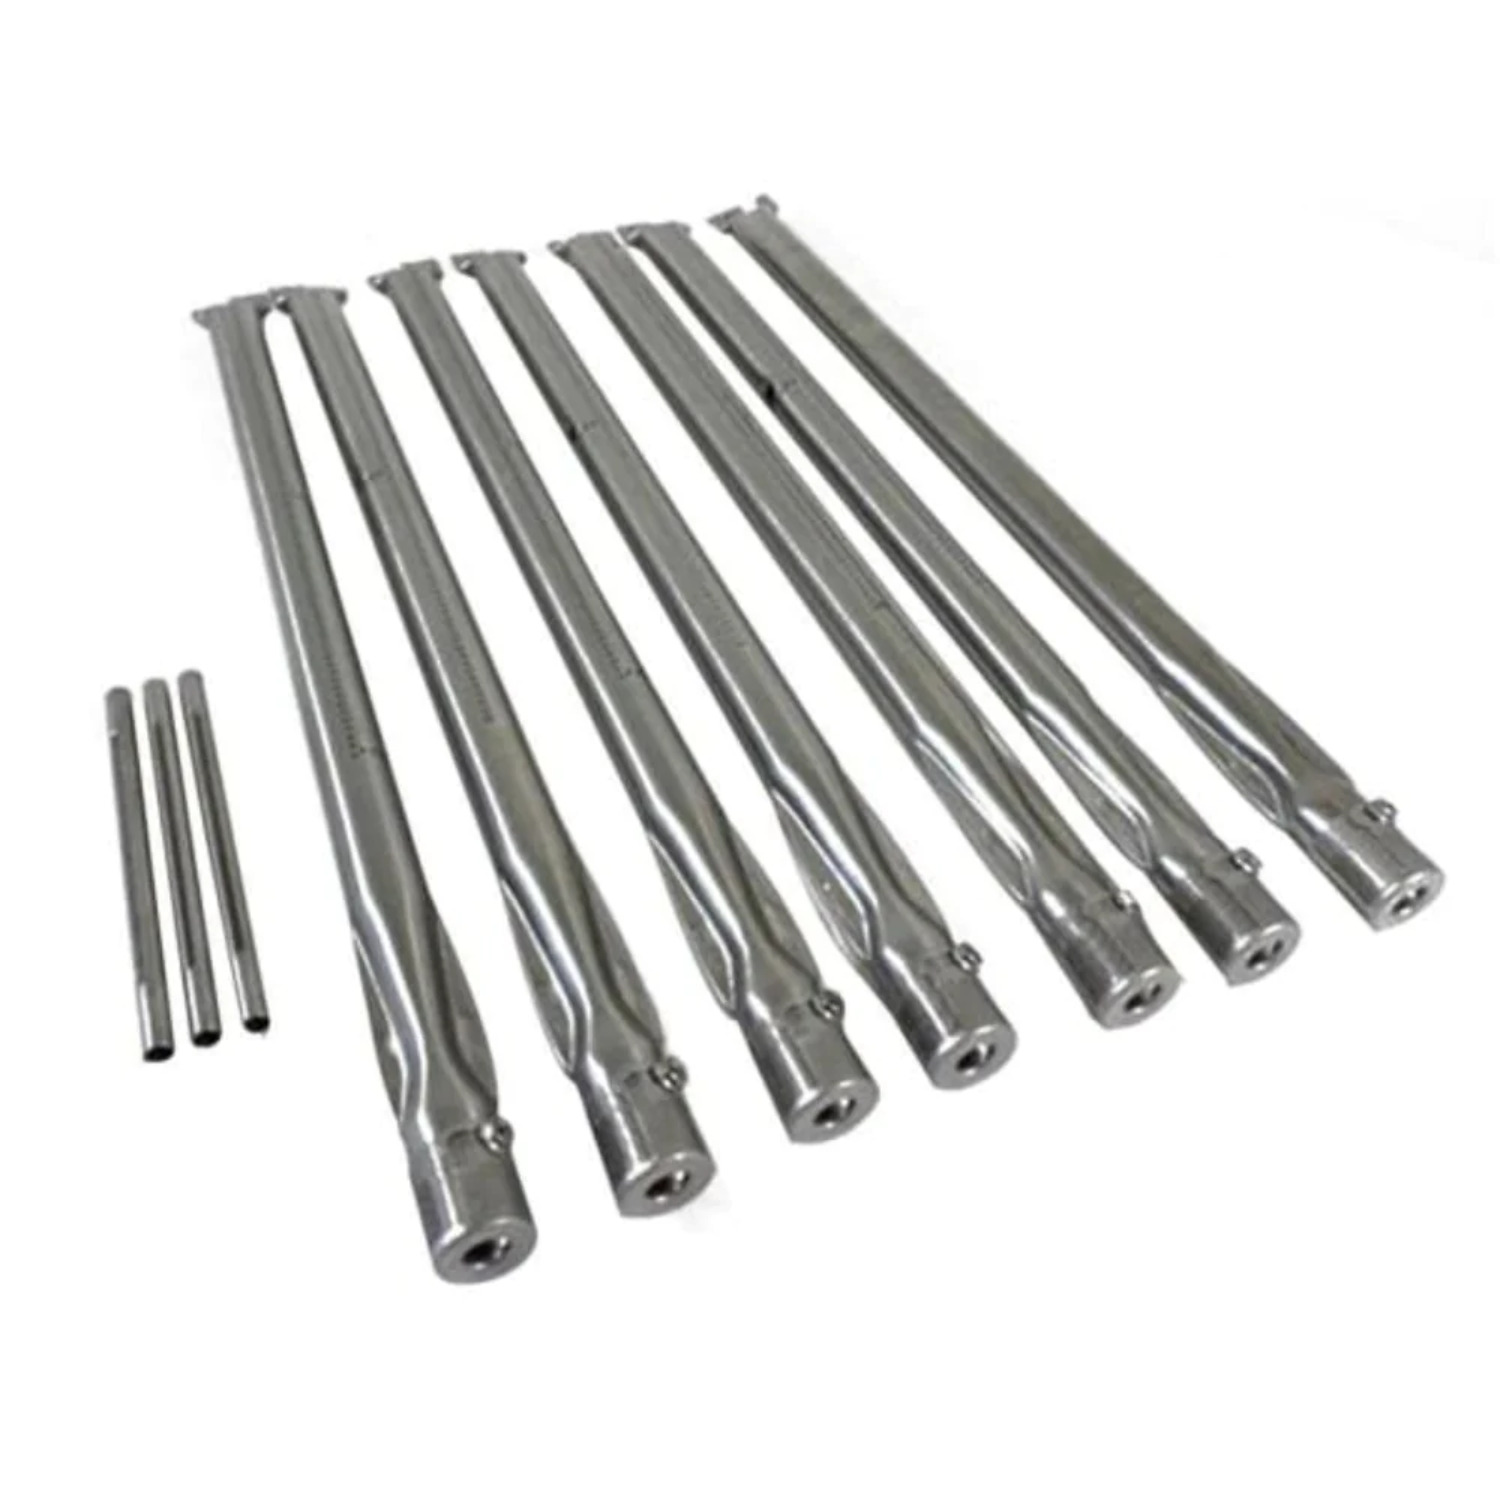 BBQ Grill Compatible With Weber Grills 6-Pack SS Burner  Smoker Set (Plus 3 Crossover Burner Tubes) BCP85663 - image 1 of 4